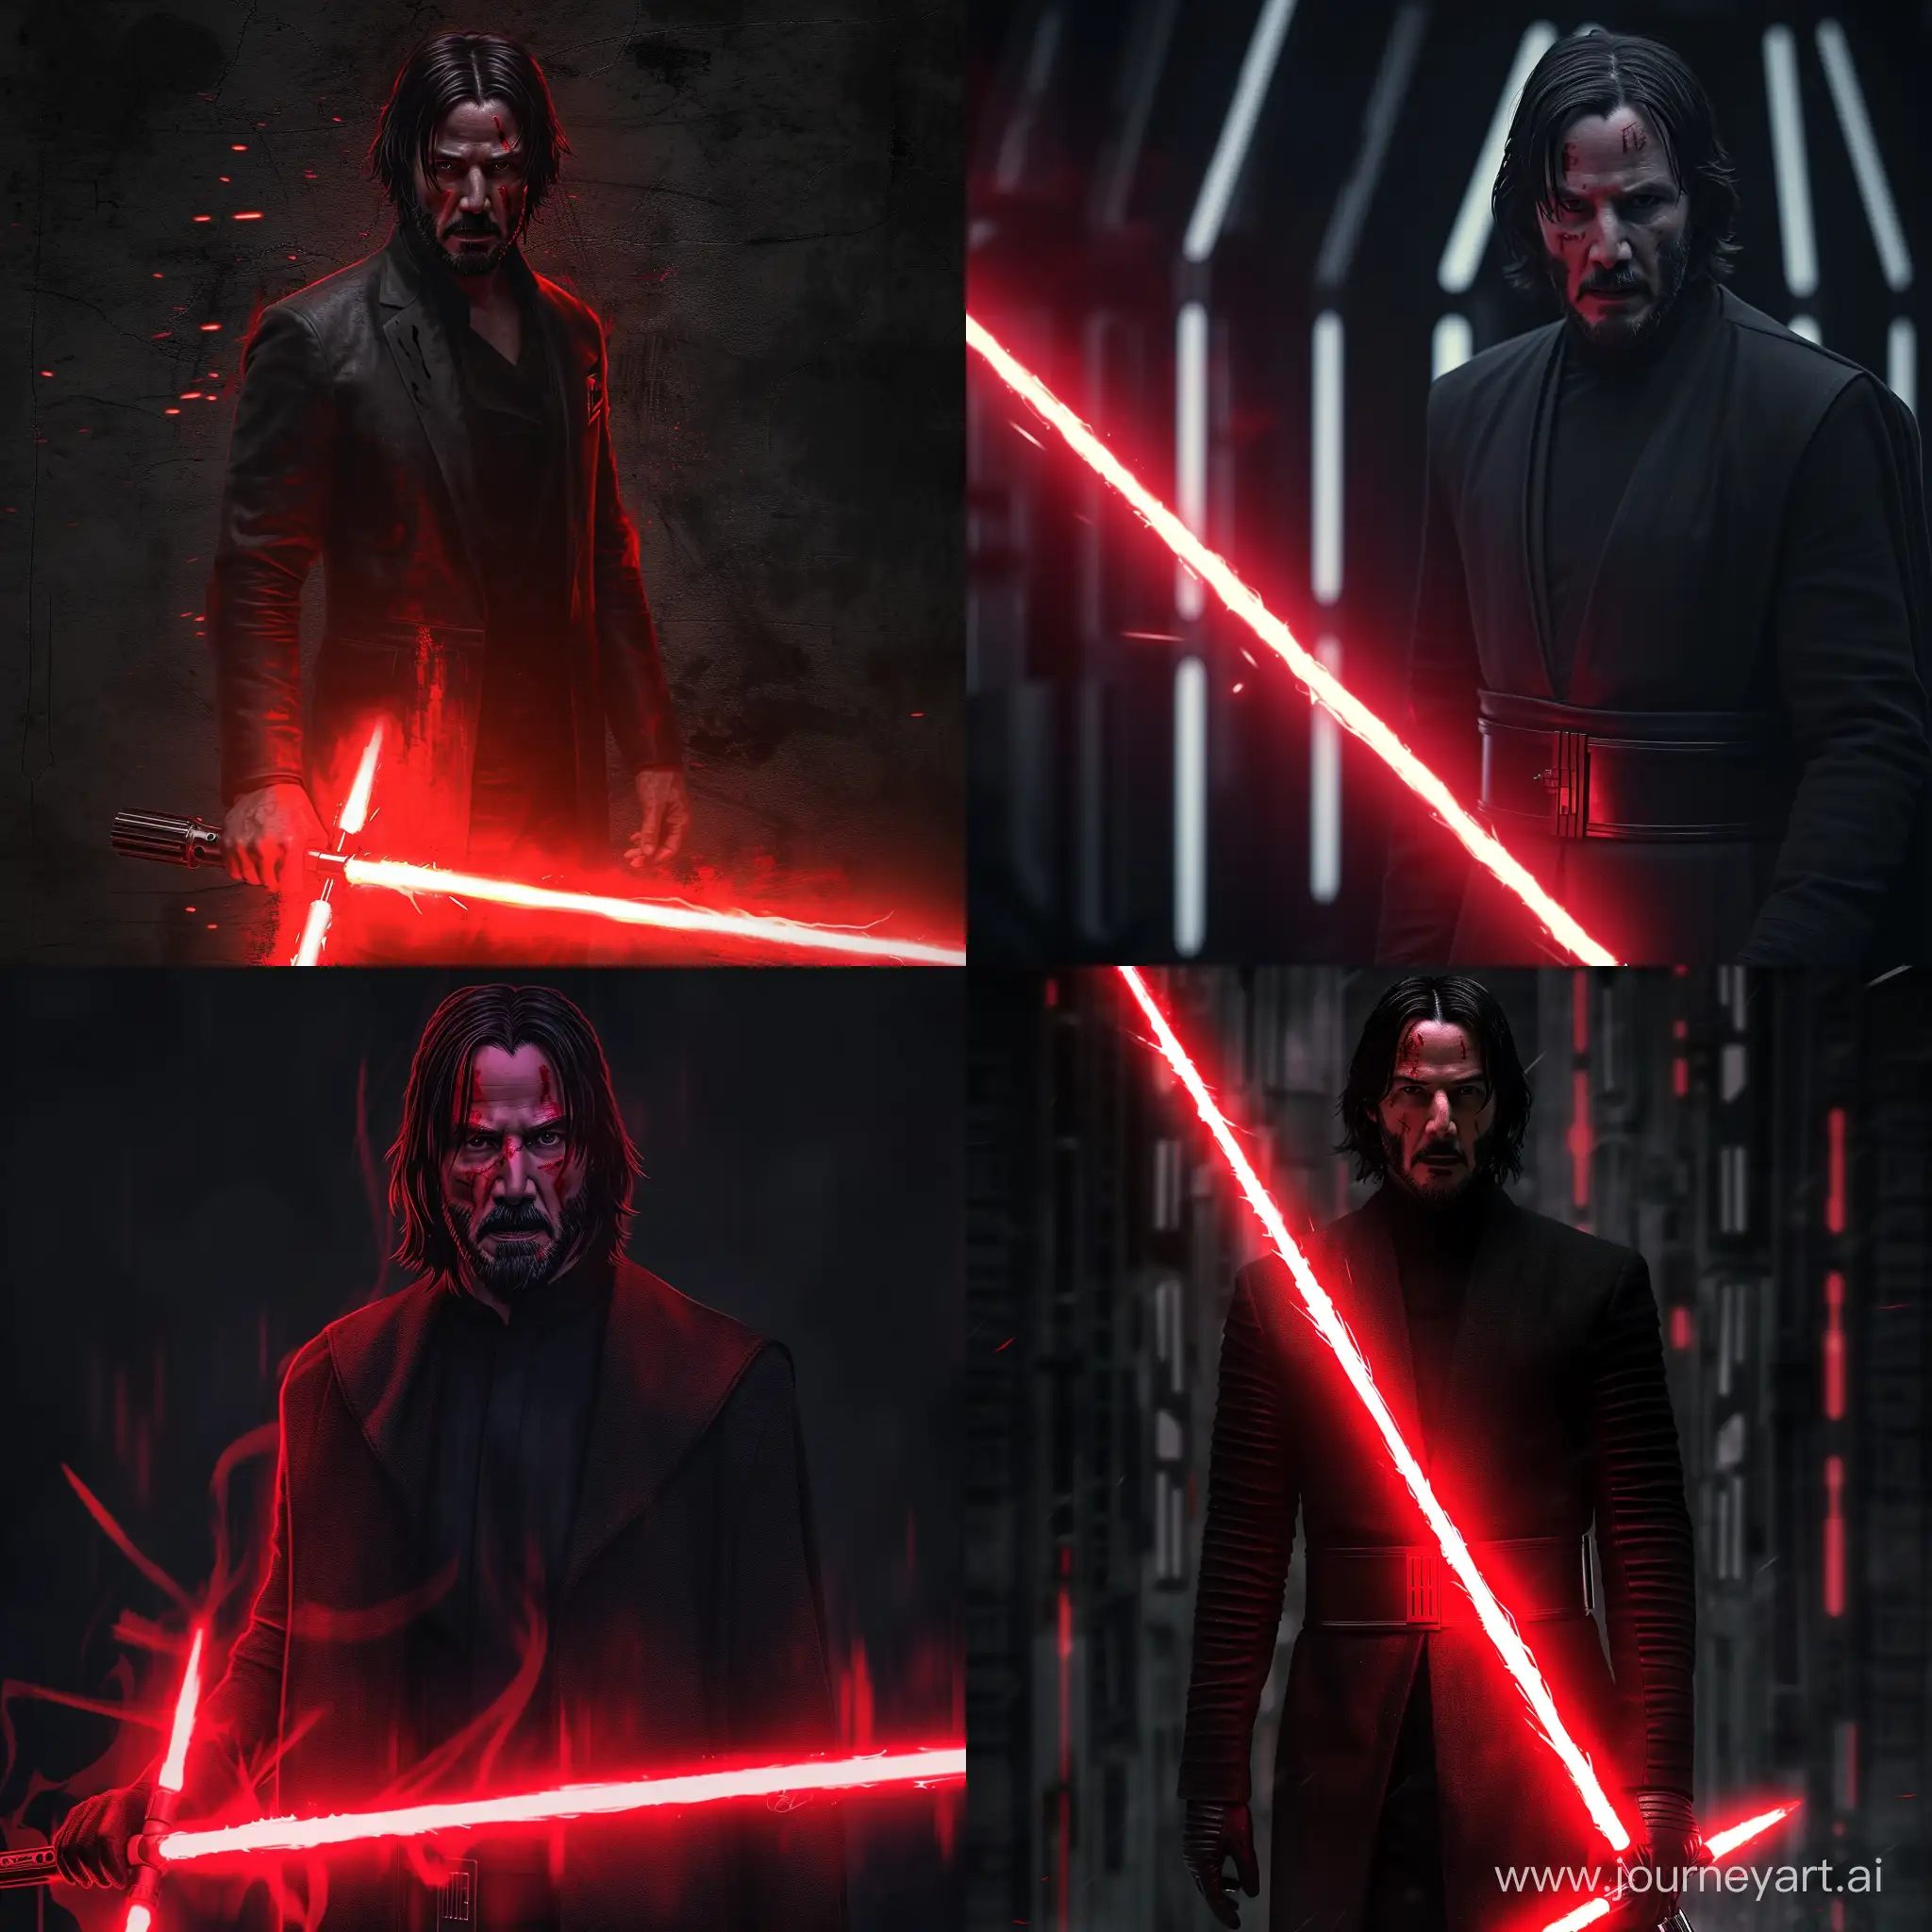 John Wick as a Sith, Star Wars, realistic, red lightsaber